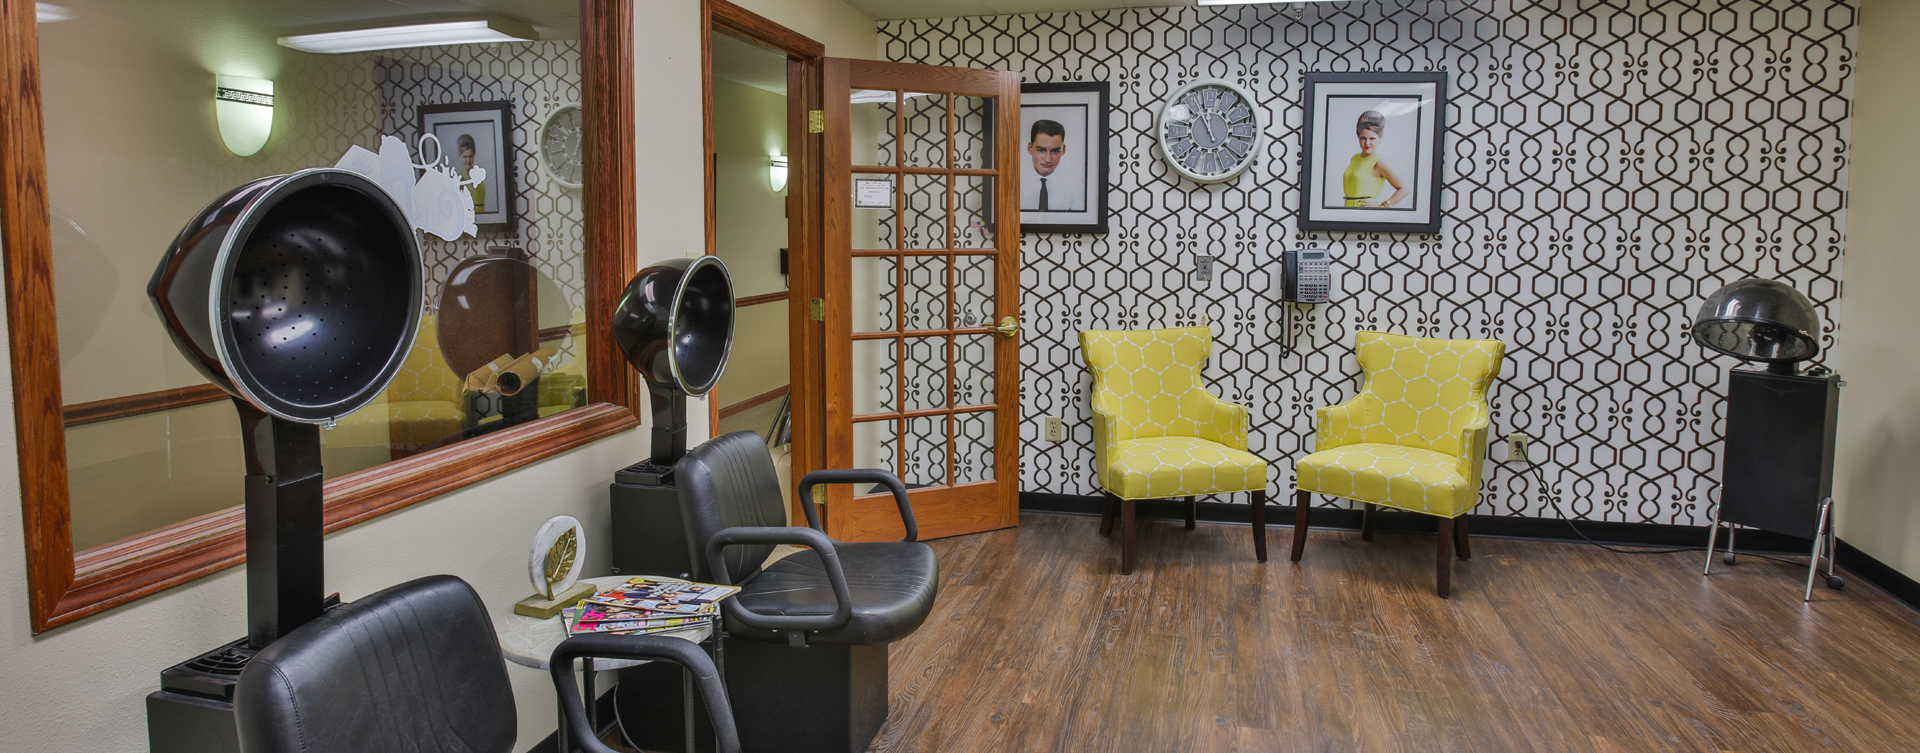 Strut on in and find out what the buzz is all about in the salon at Bickford of Peoria